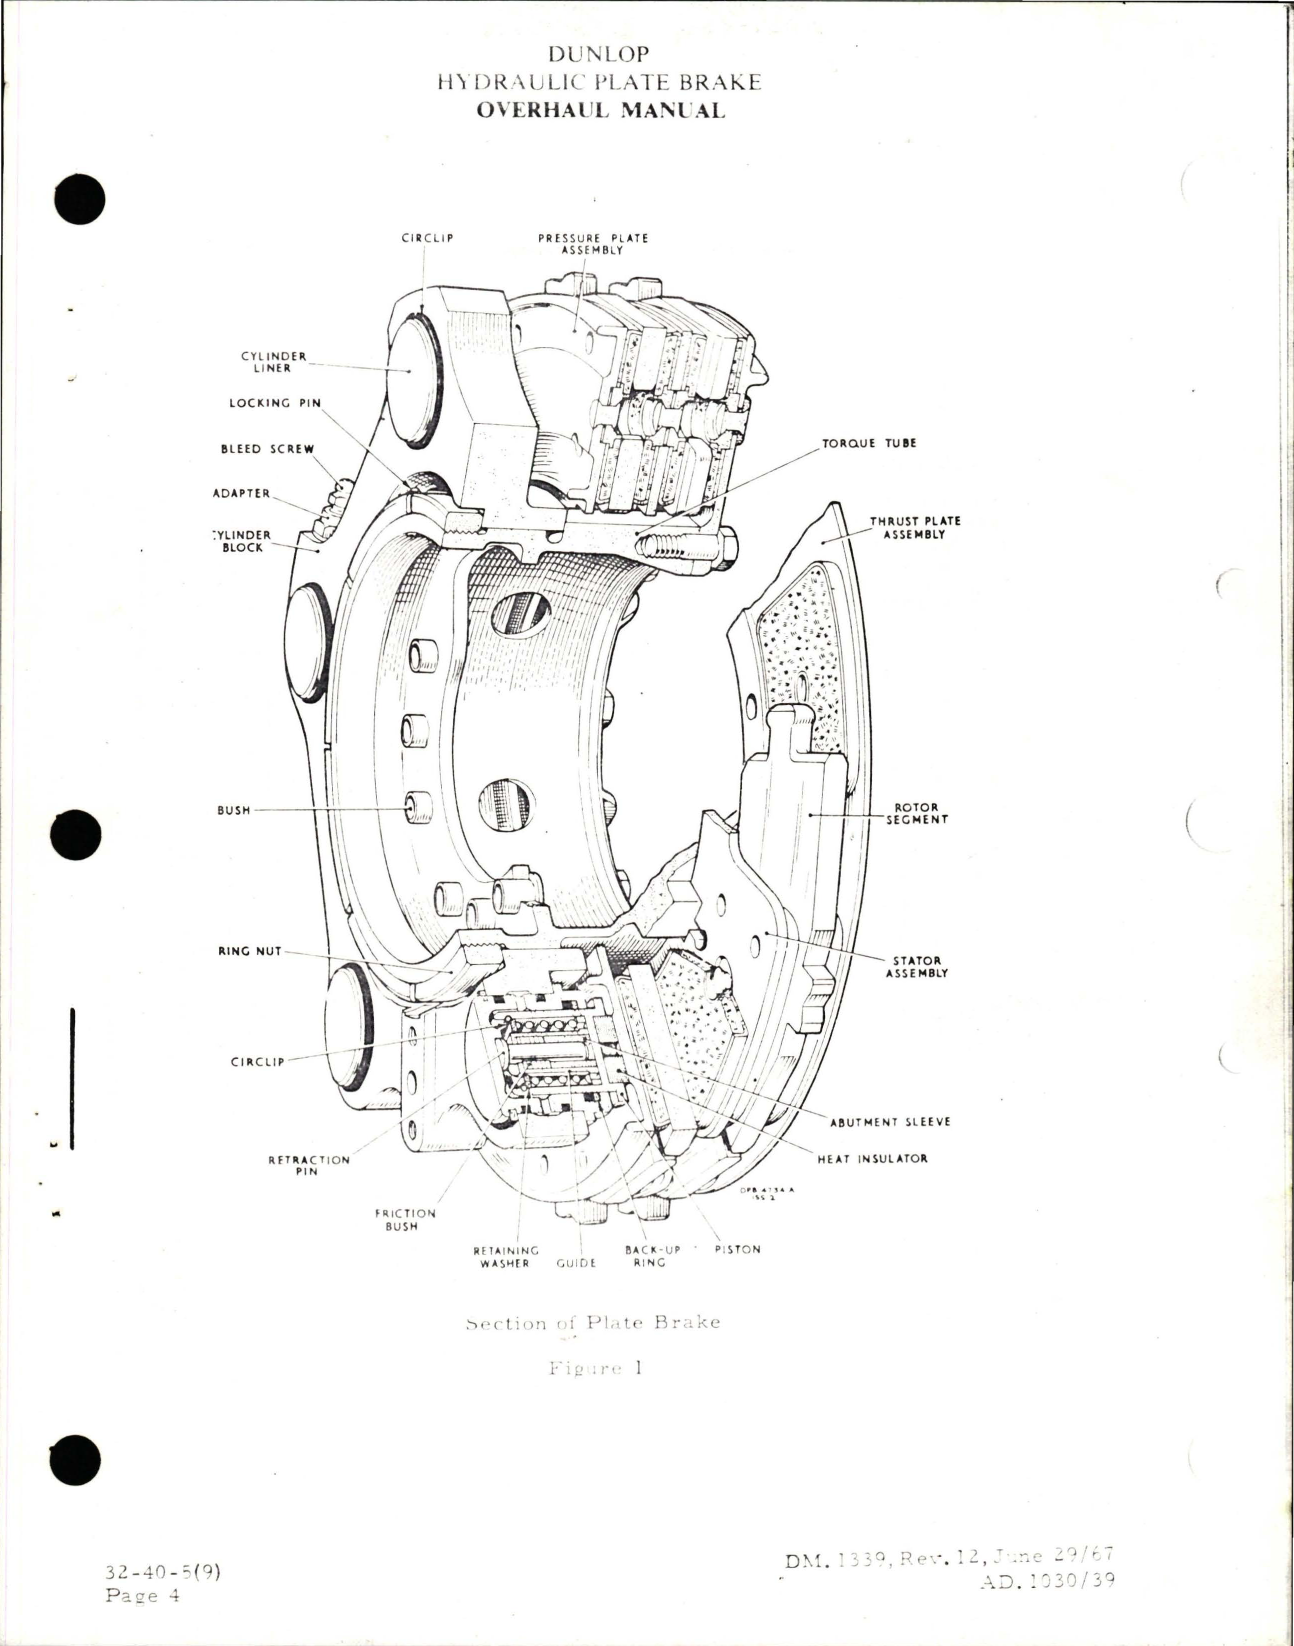 Sample page 5 from AirCorps Library document: Overhaul for Hydraulic Plate Brake